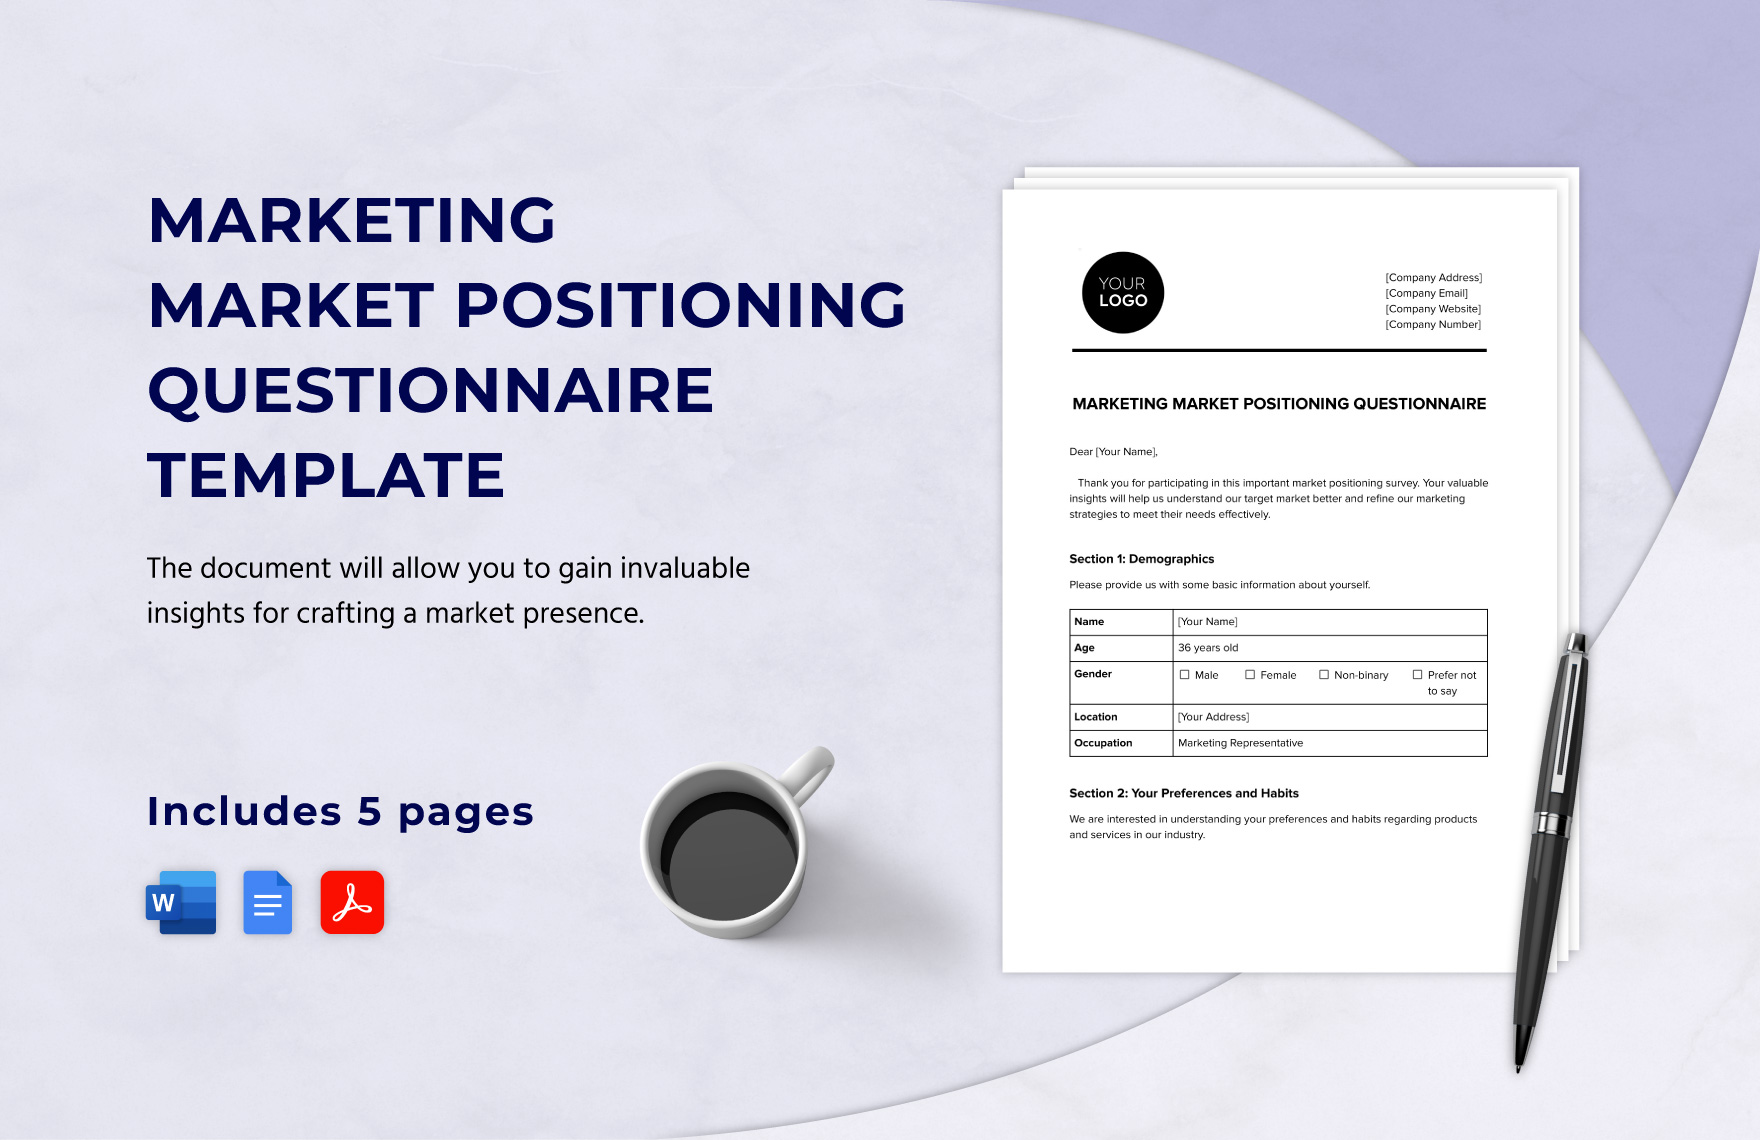 Marketing Market Positioning Questionnaire Template in Word, Google Docs, PDF